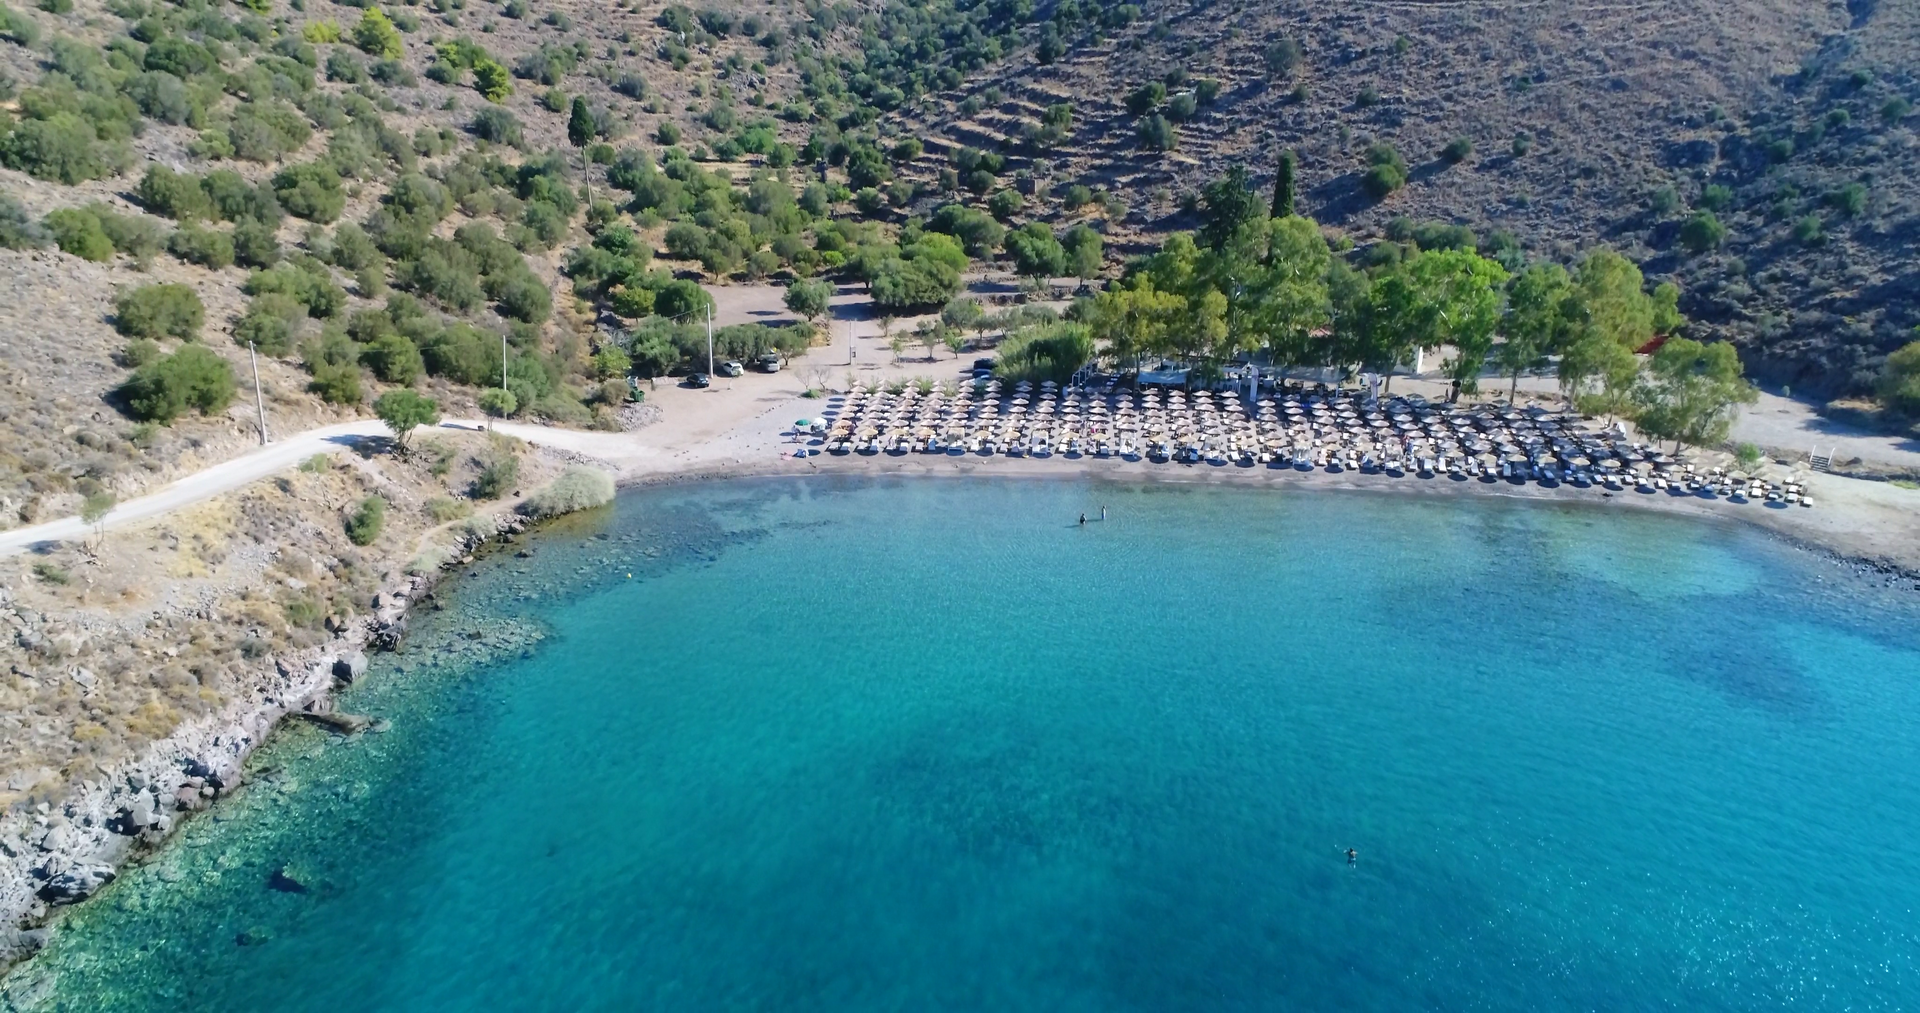 Which are the best beaches for a swim in the Saronic Gulf?